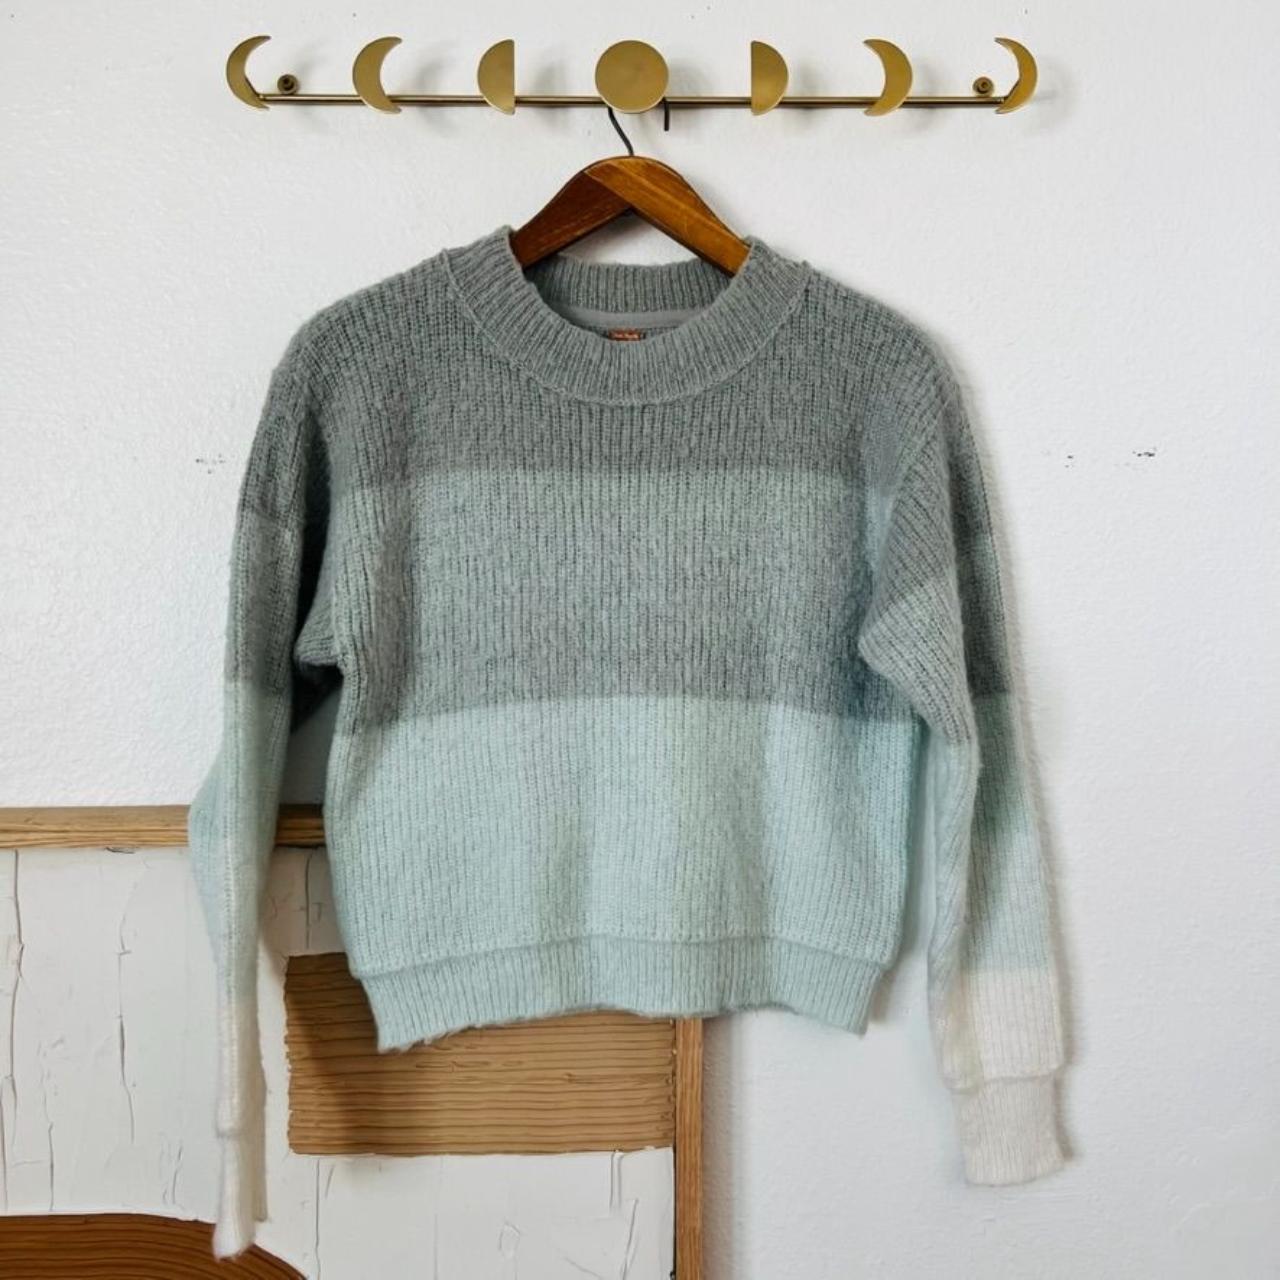 Free picture: sweater, wool, cloth, colors, colorful